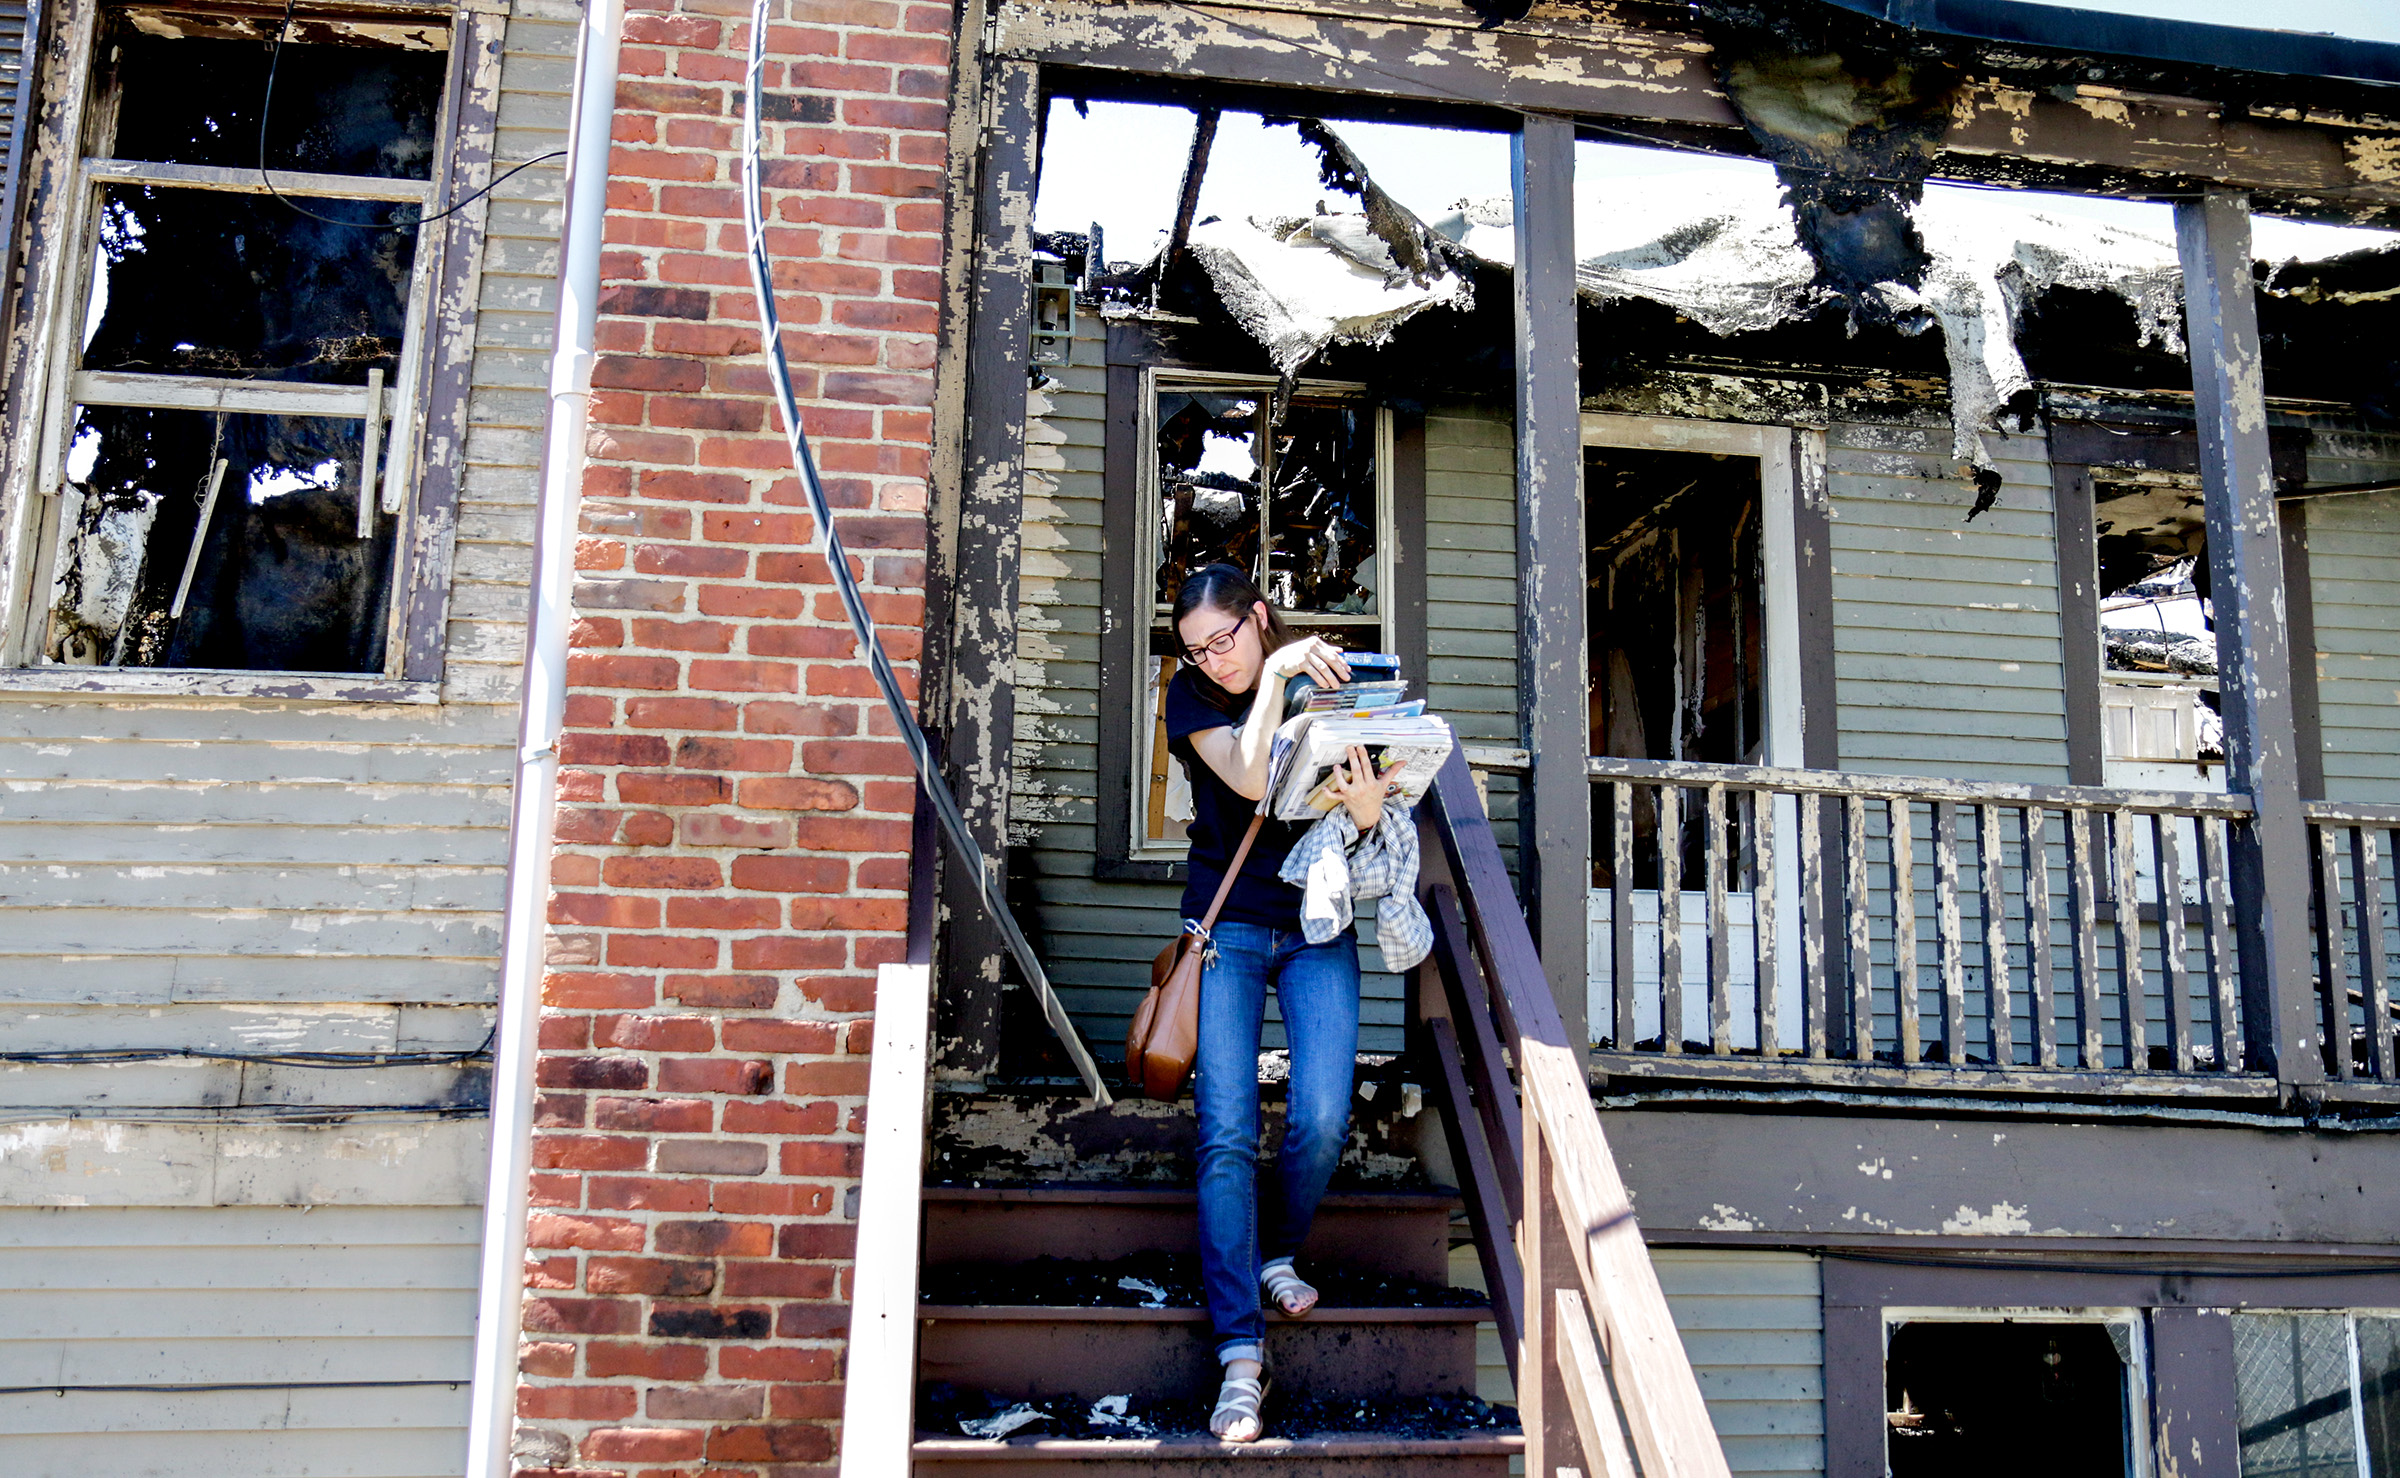  Grae O'Toole retrieves items that survived the fire that claimed her apartment in Woodstock, Vt., in addition to Pi Brick Oven Trattoria, and parts of the Vermont Standard offices. O'Toole was woken by the smoke alarms on Monday morning and dialed 9